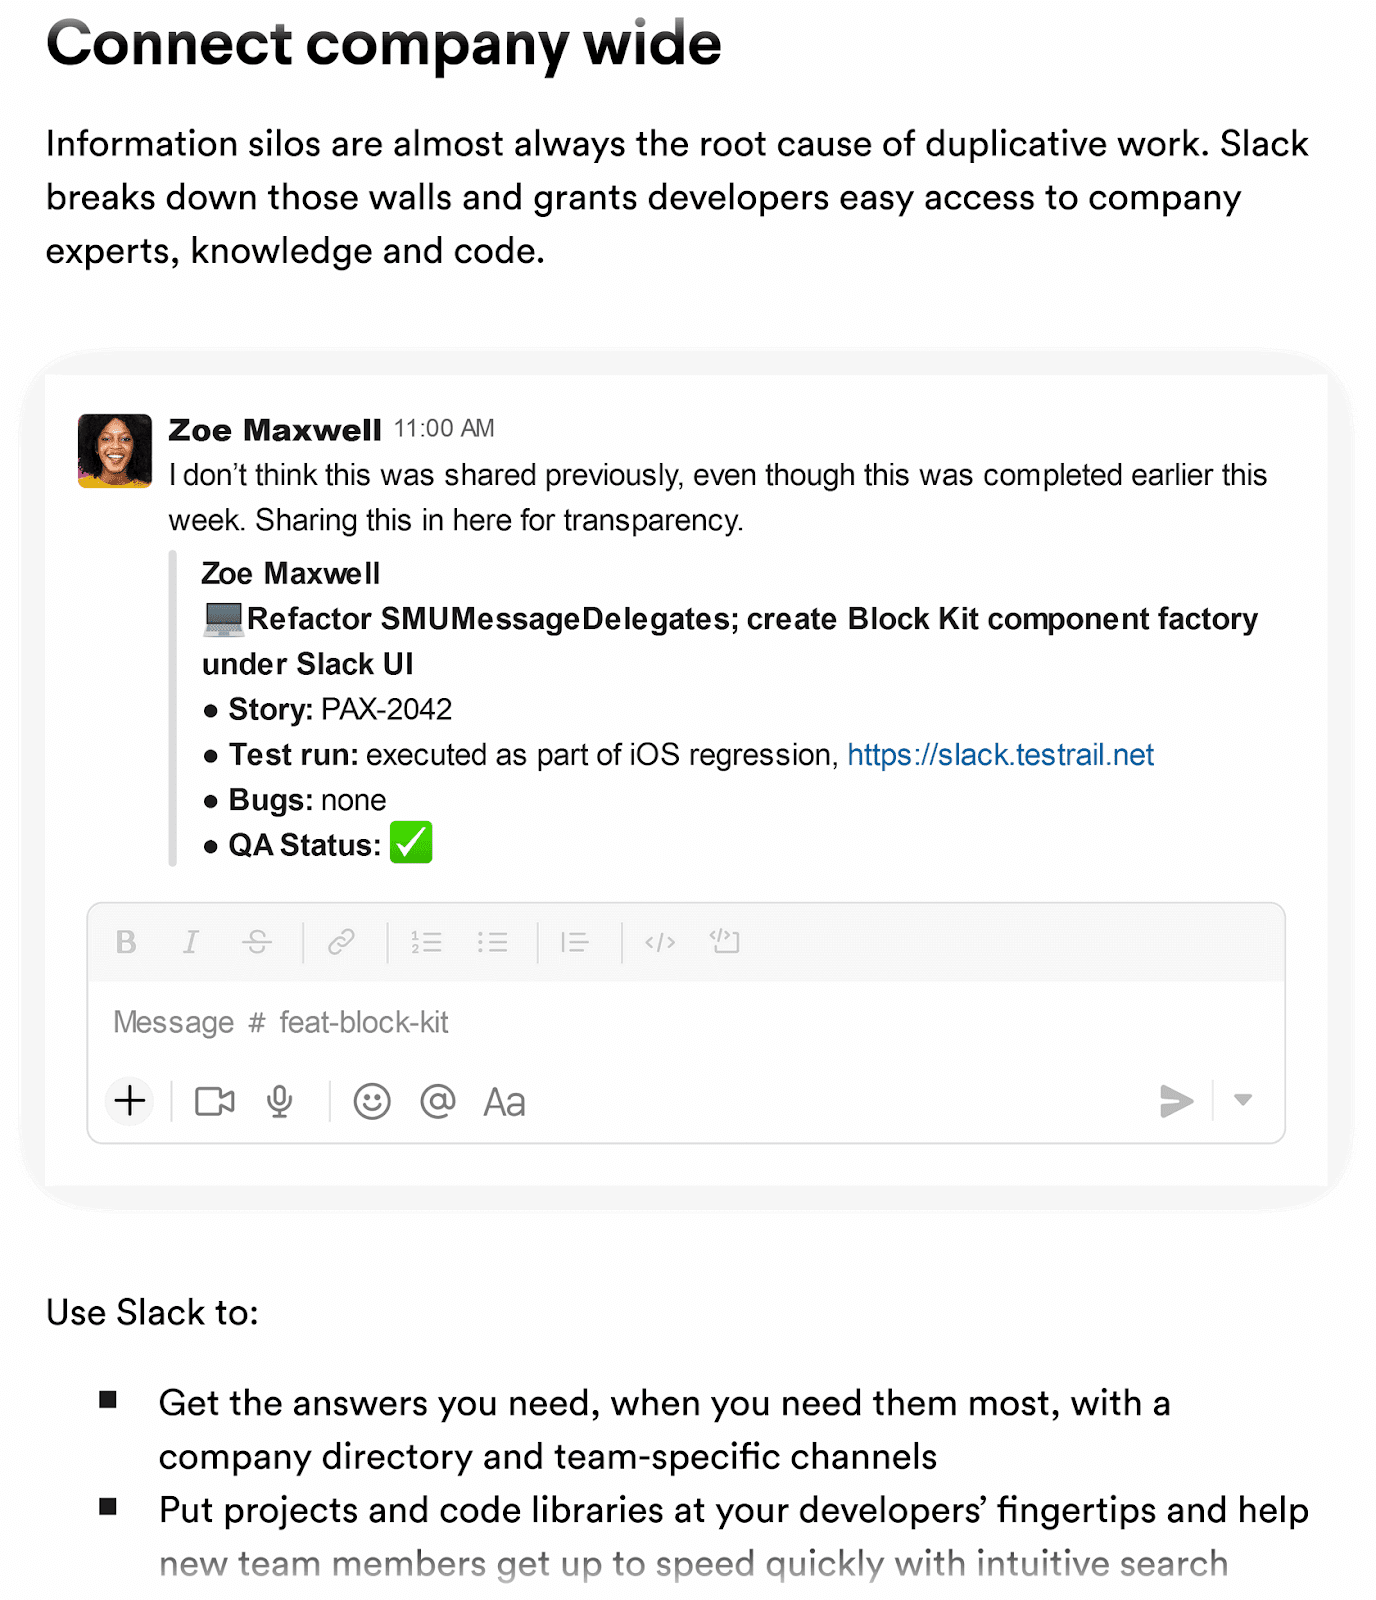 an example from Slack of how to naturally mention products